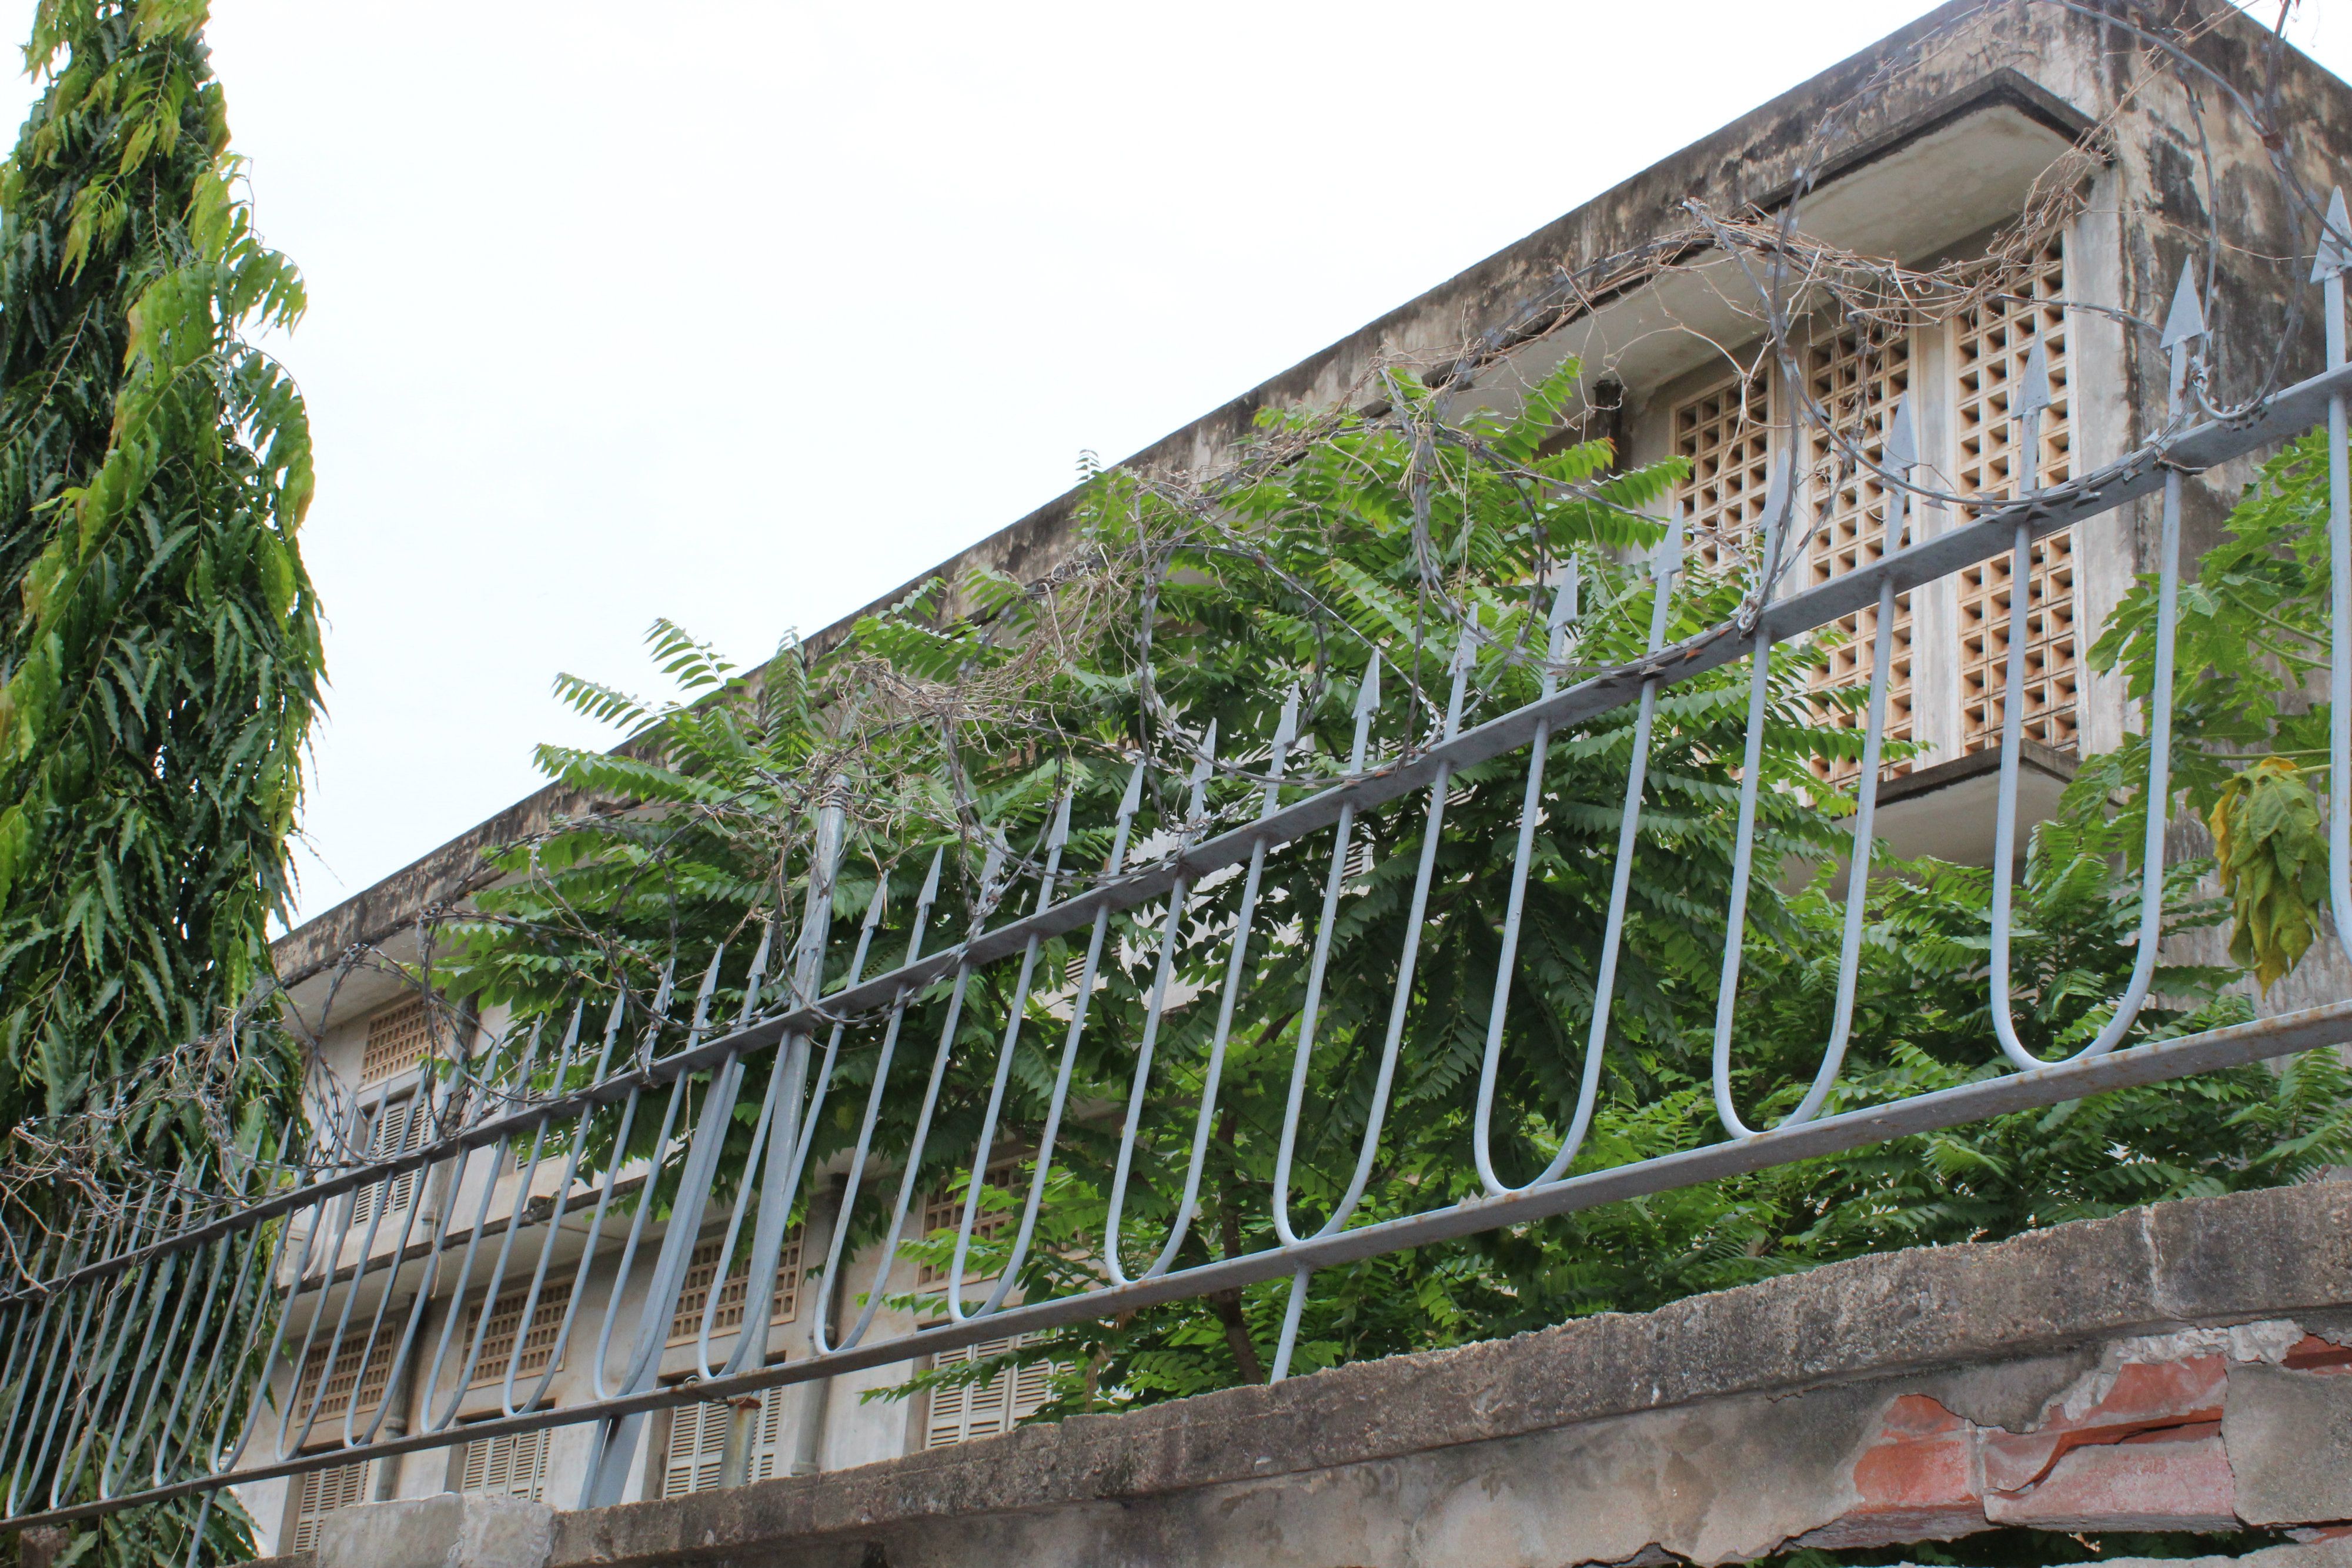 Photograph of S-21 former concentration camp, taken from the perimeter wall.  Barbed wires, spiked metal railings, and overgrown ferns partly shield the view of the building. Image by M.G. Zimeta. Cambodia, 2018.